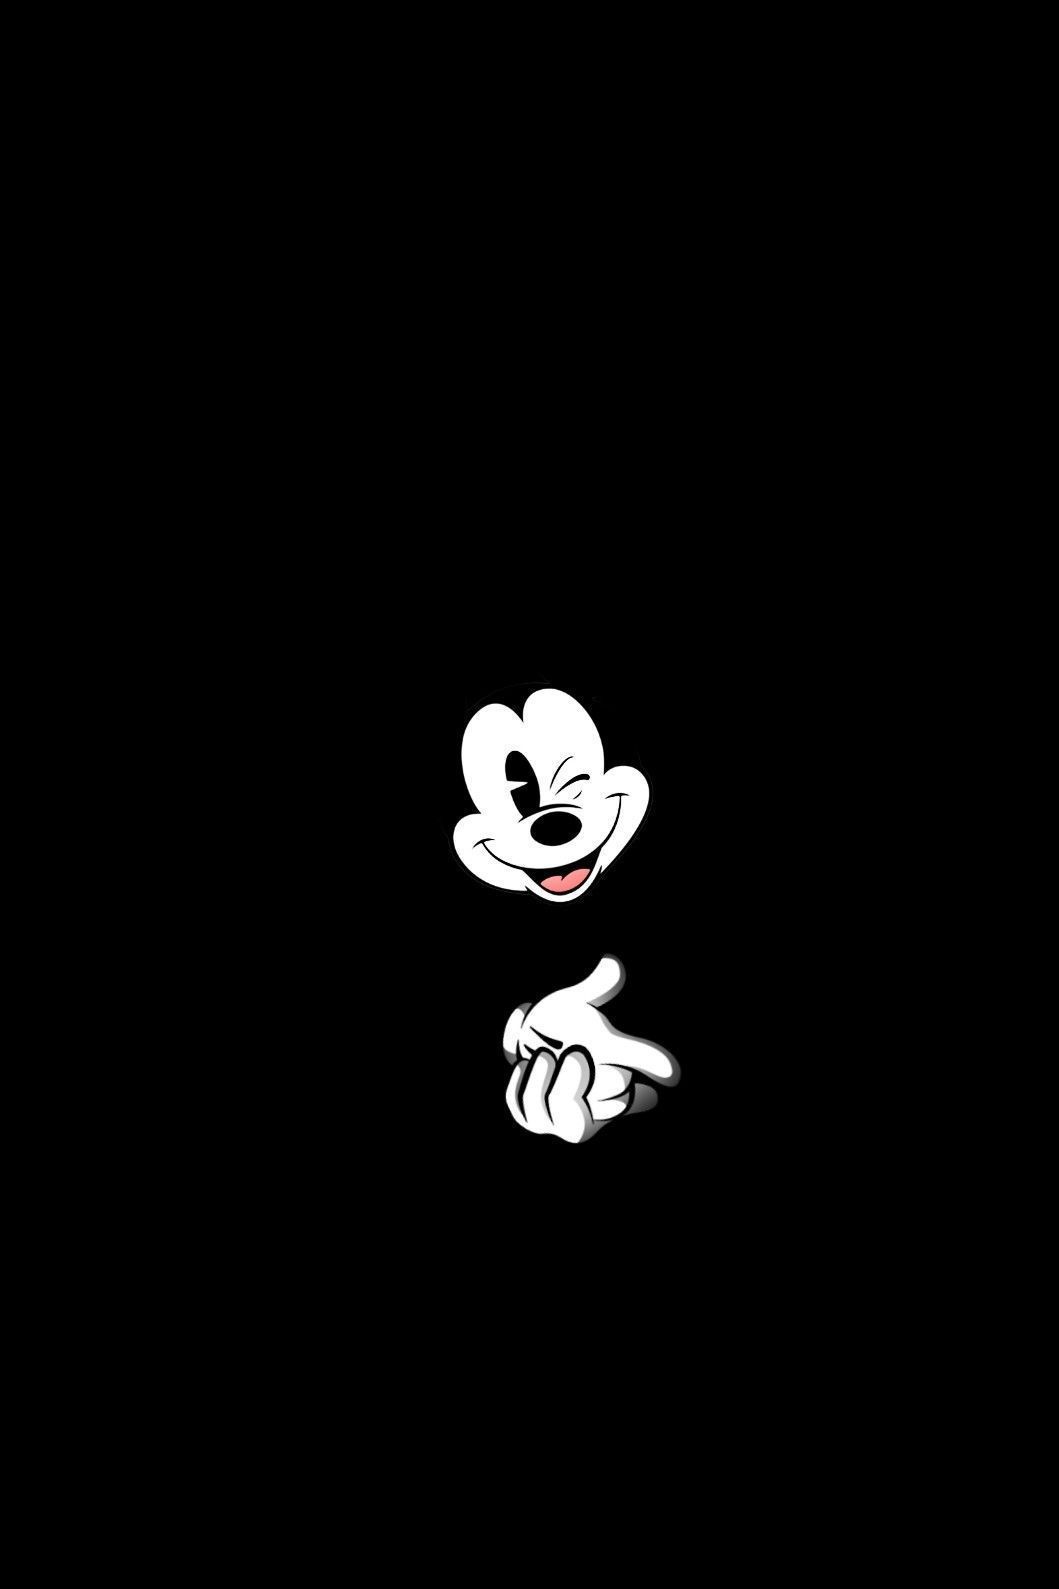 Mickey wallpaper Mickey Mouse Wallpaper iPhone, Cute Disney Wallpaper, Cute Cartoo. Mickey mouse wallpaper, Mickey mouse wallpaper iphone, Cute cartoon wallpaper